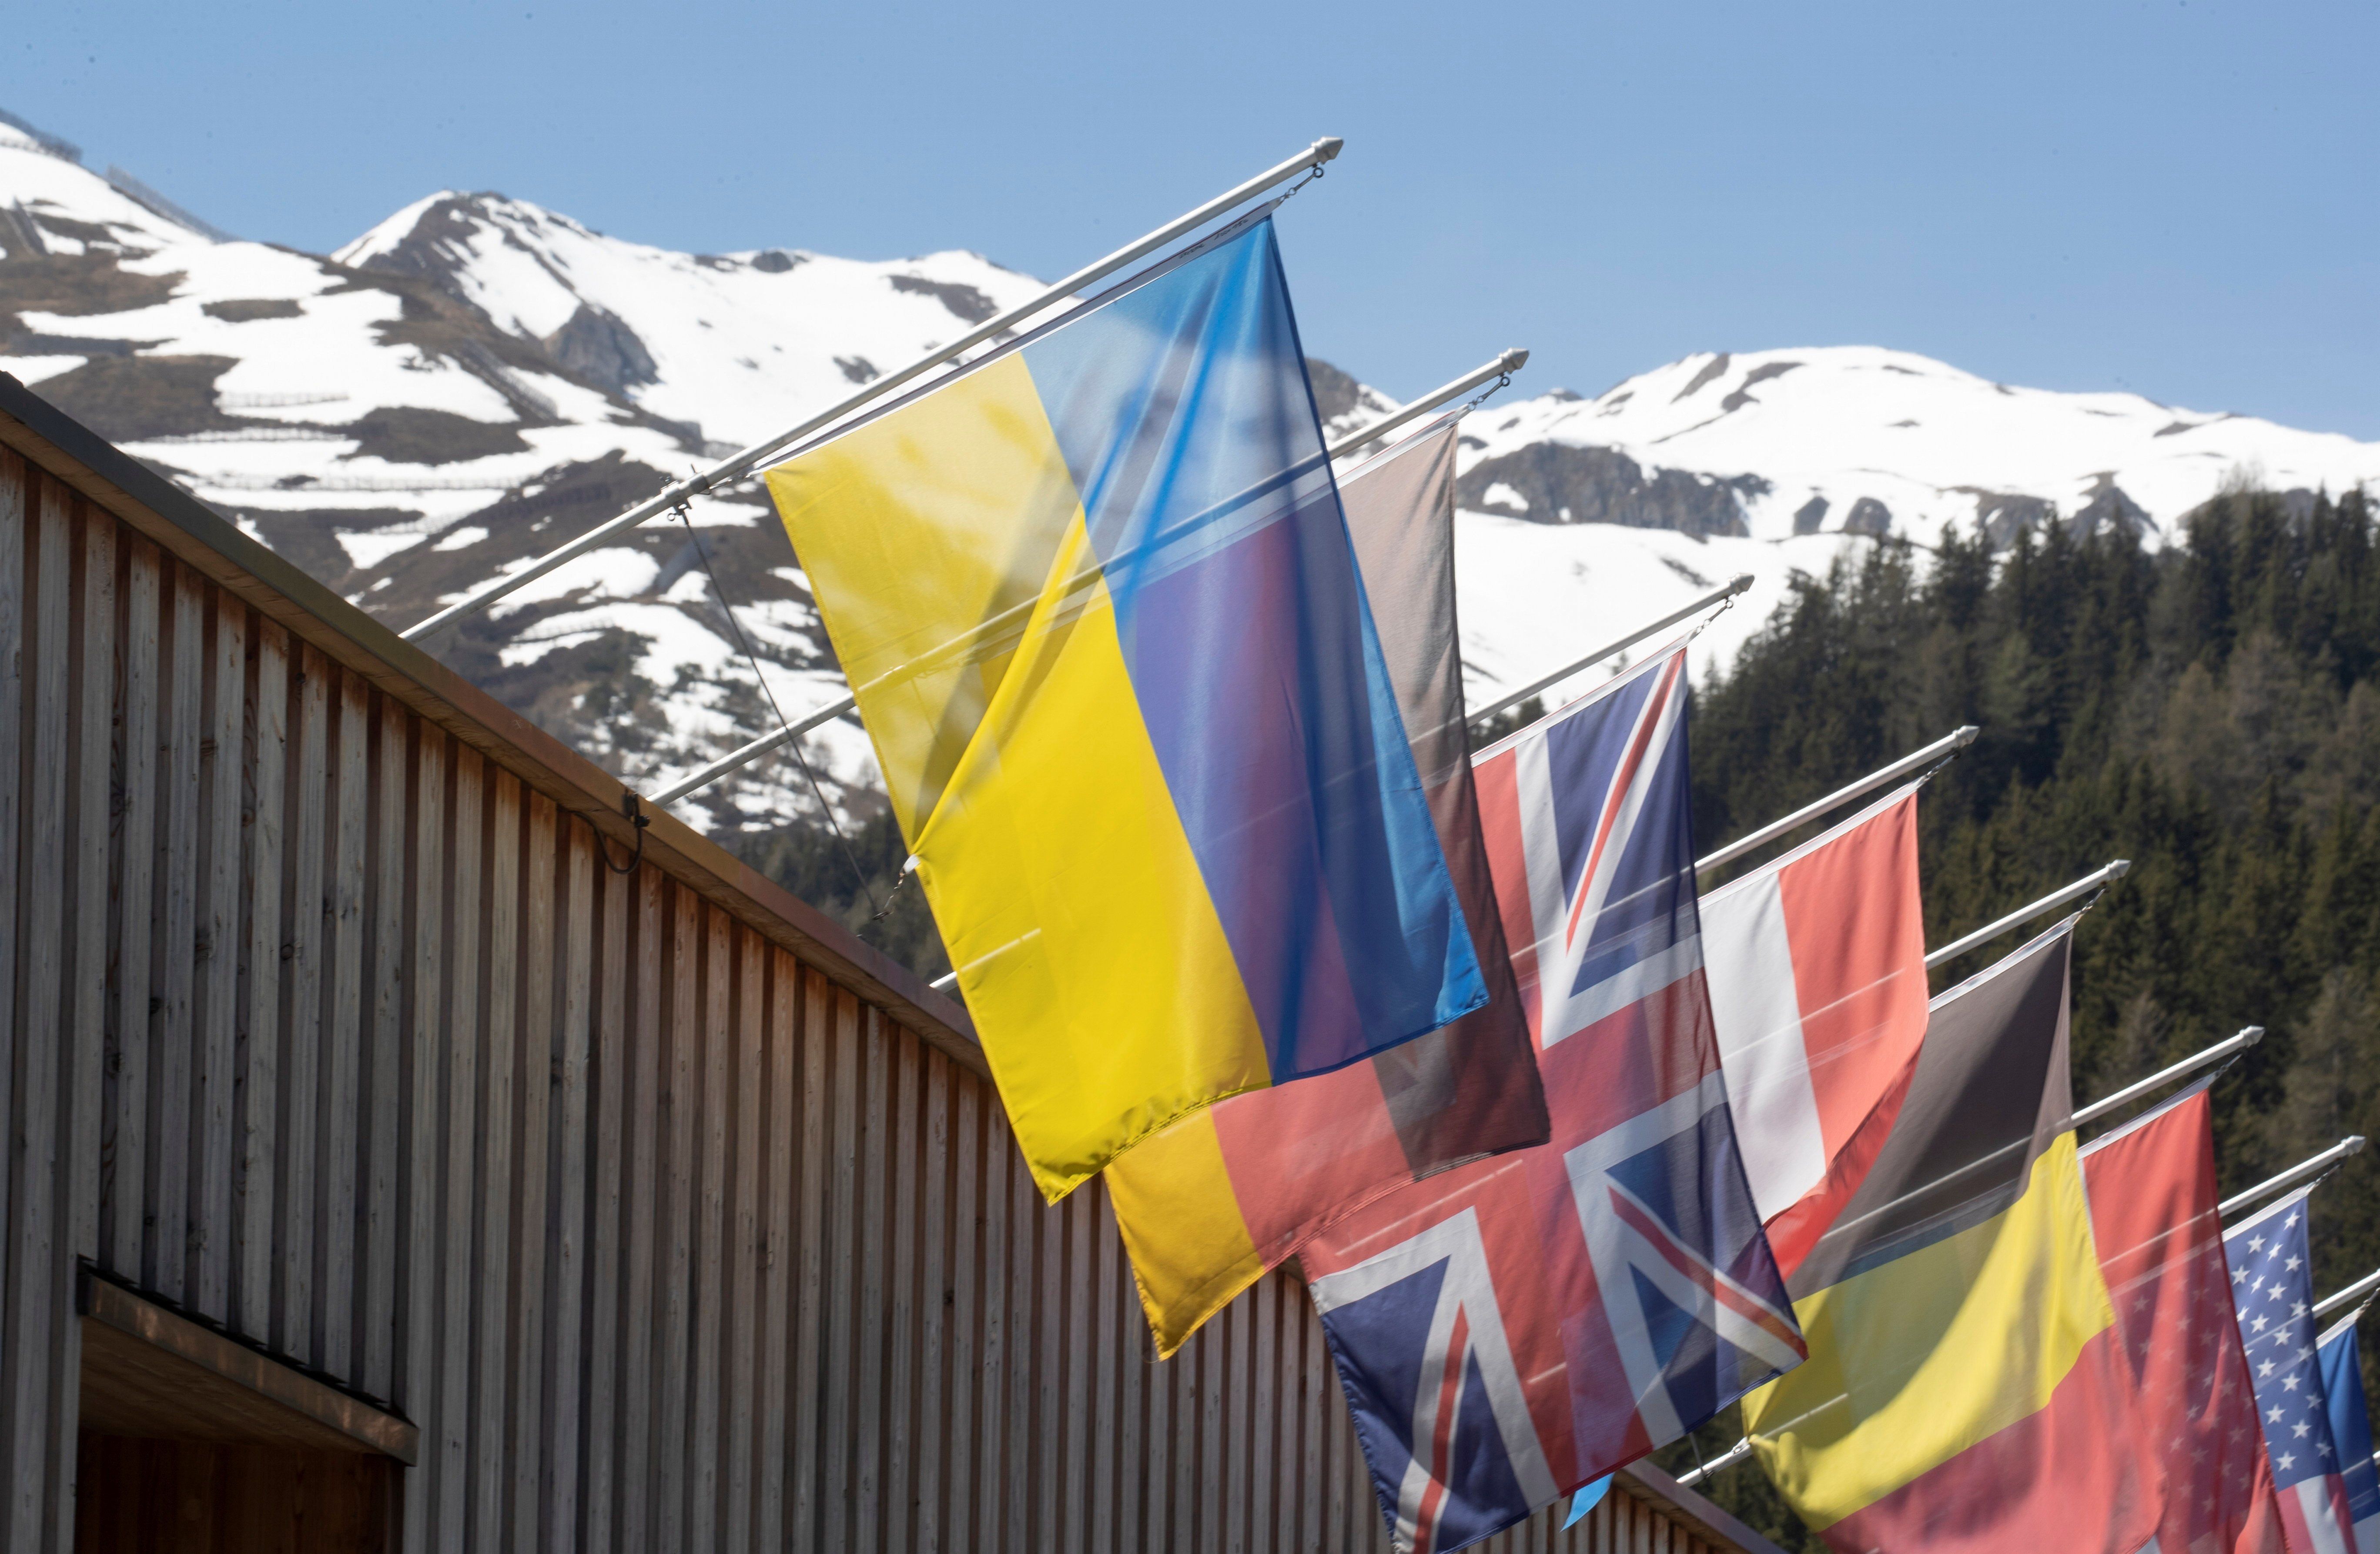 The national flag of Ukraine flies along with other countries' flags at the congress center for the 2022 edition of the World Economic Forum. 